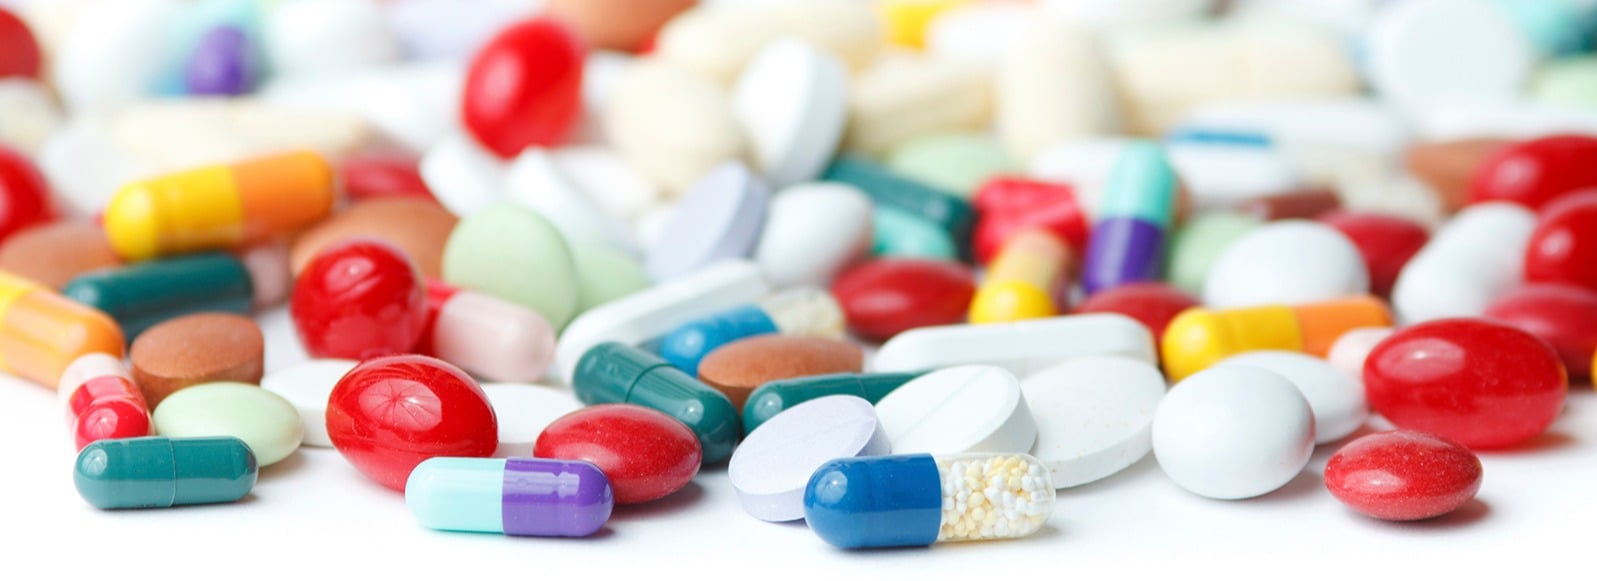 Colorful pile of pharmaceutical pills 